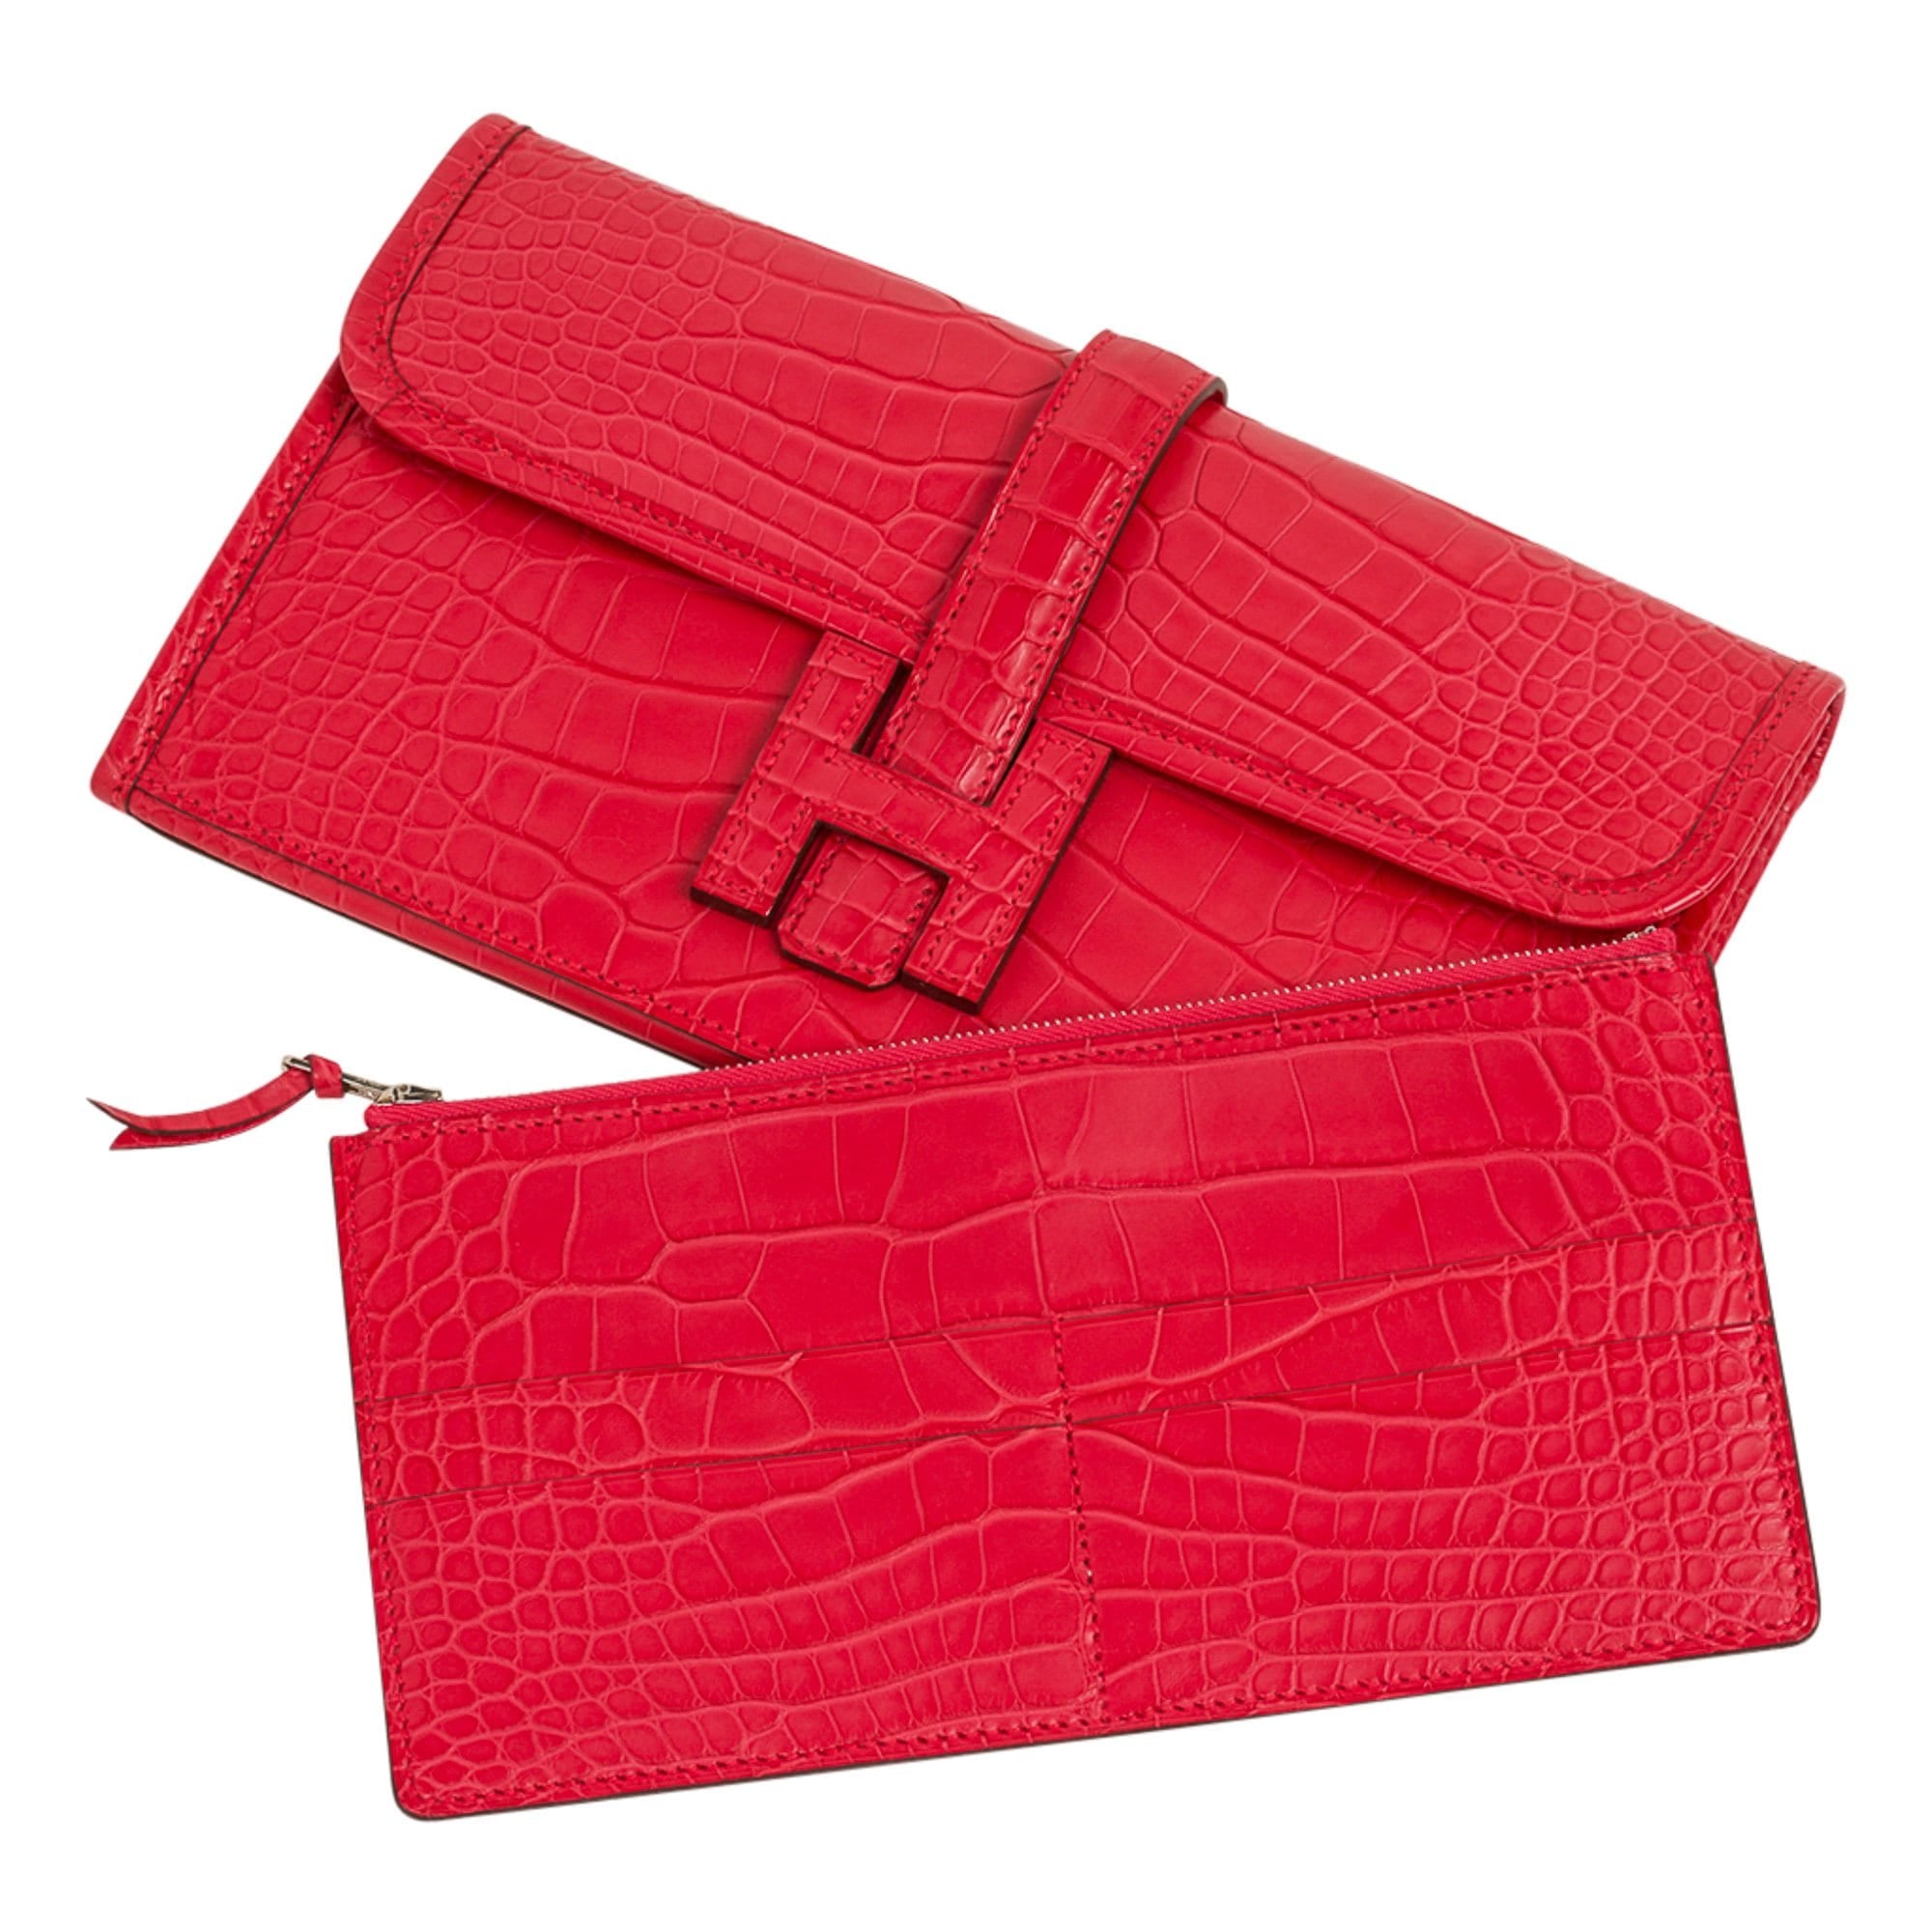 Hermes Jige Duo Wallet / Clutch Rose Extreme Matte Alligator New –  Mightychic